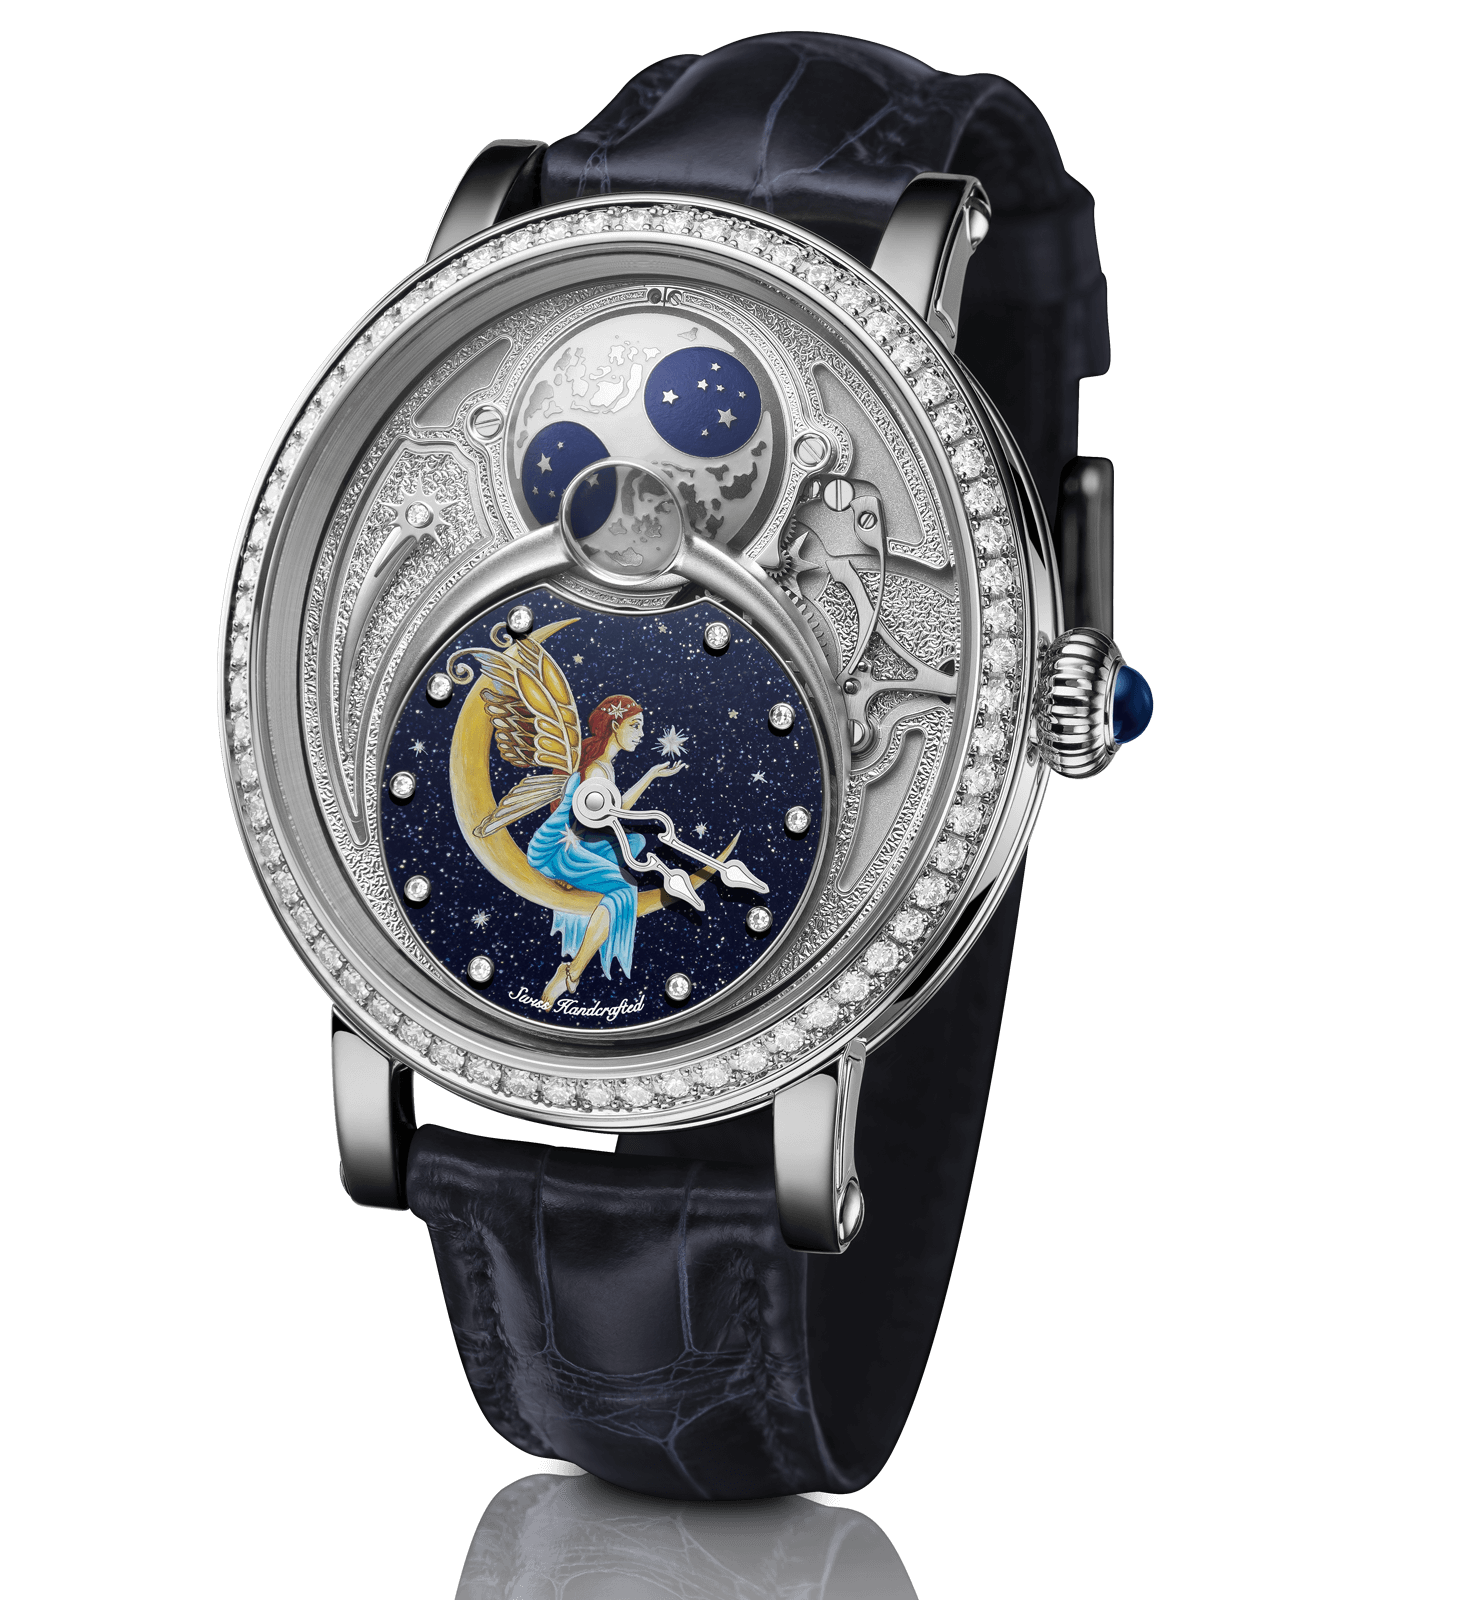 ONLY WATCH 2019 Récital 23 « Hope » - Bovet 1822